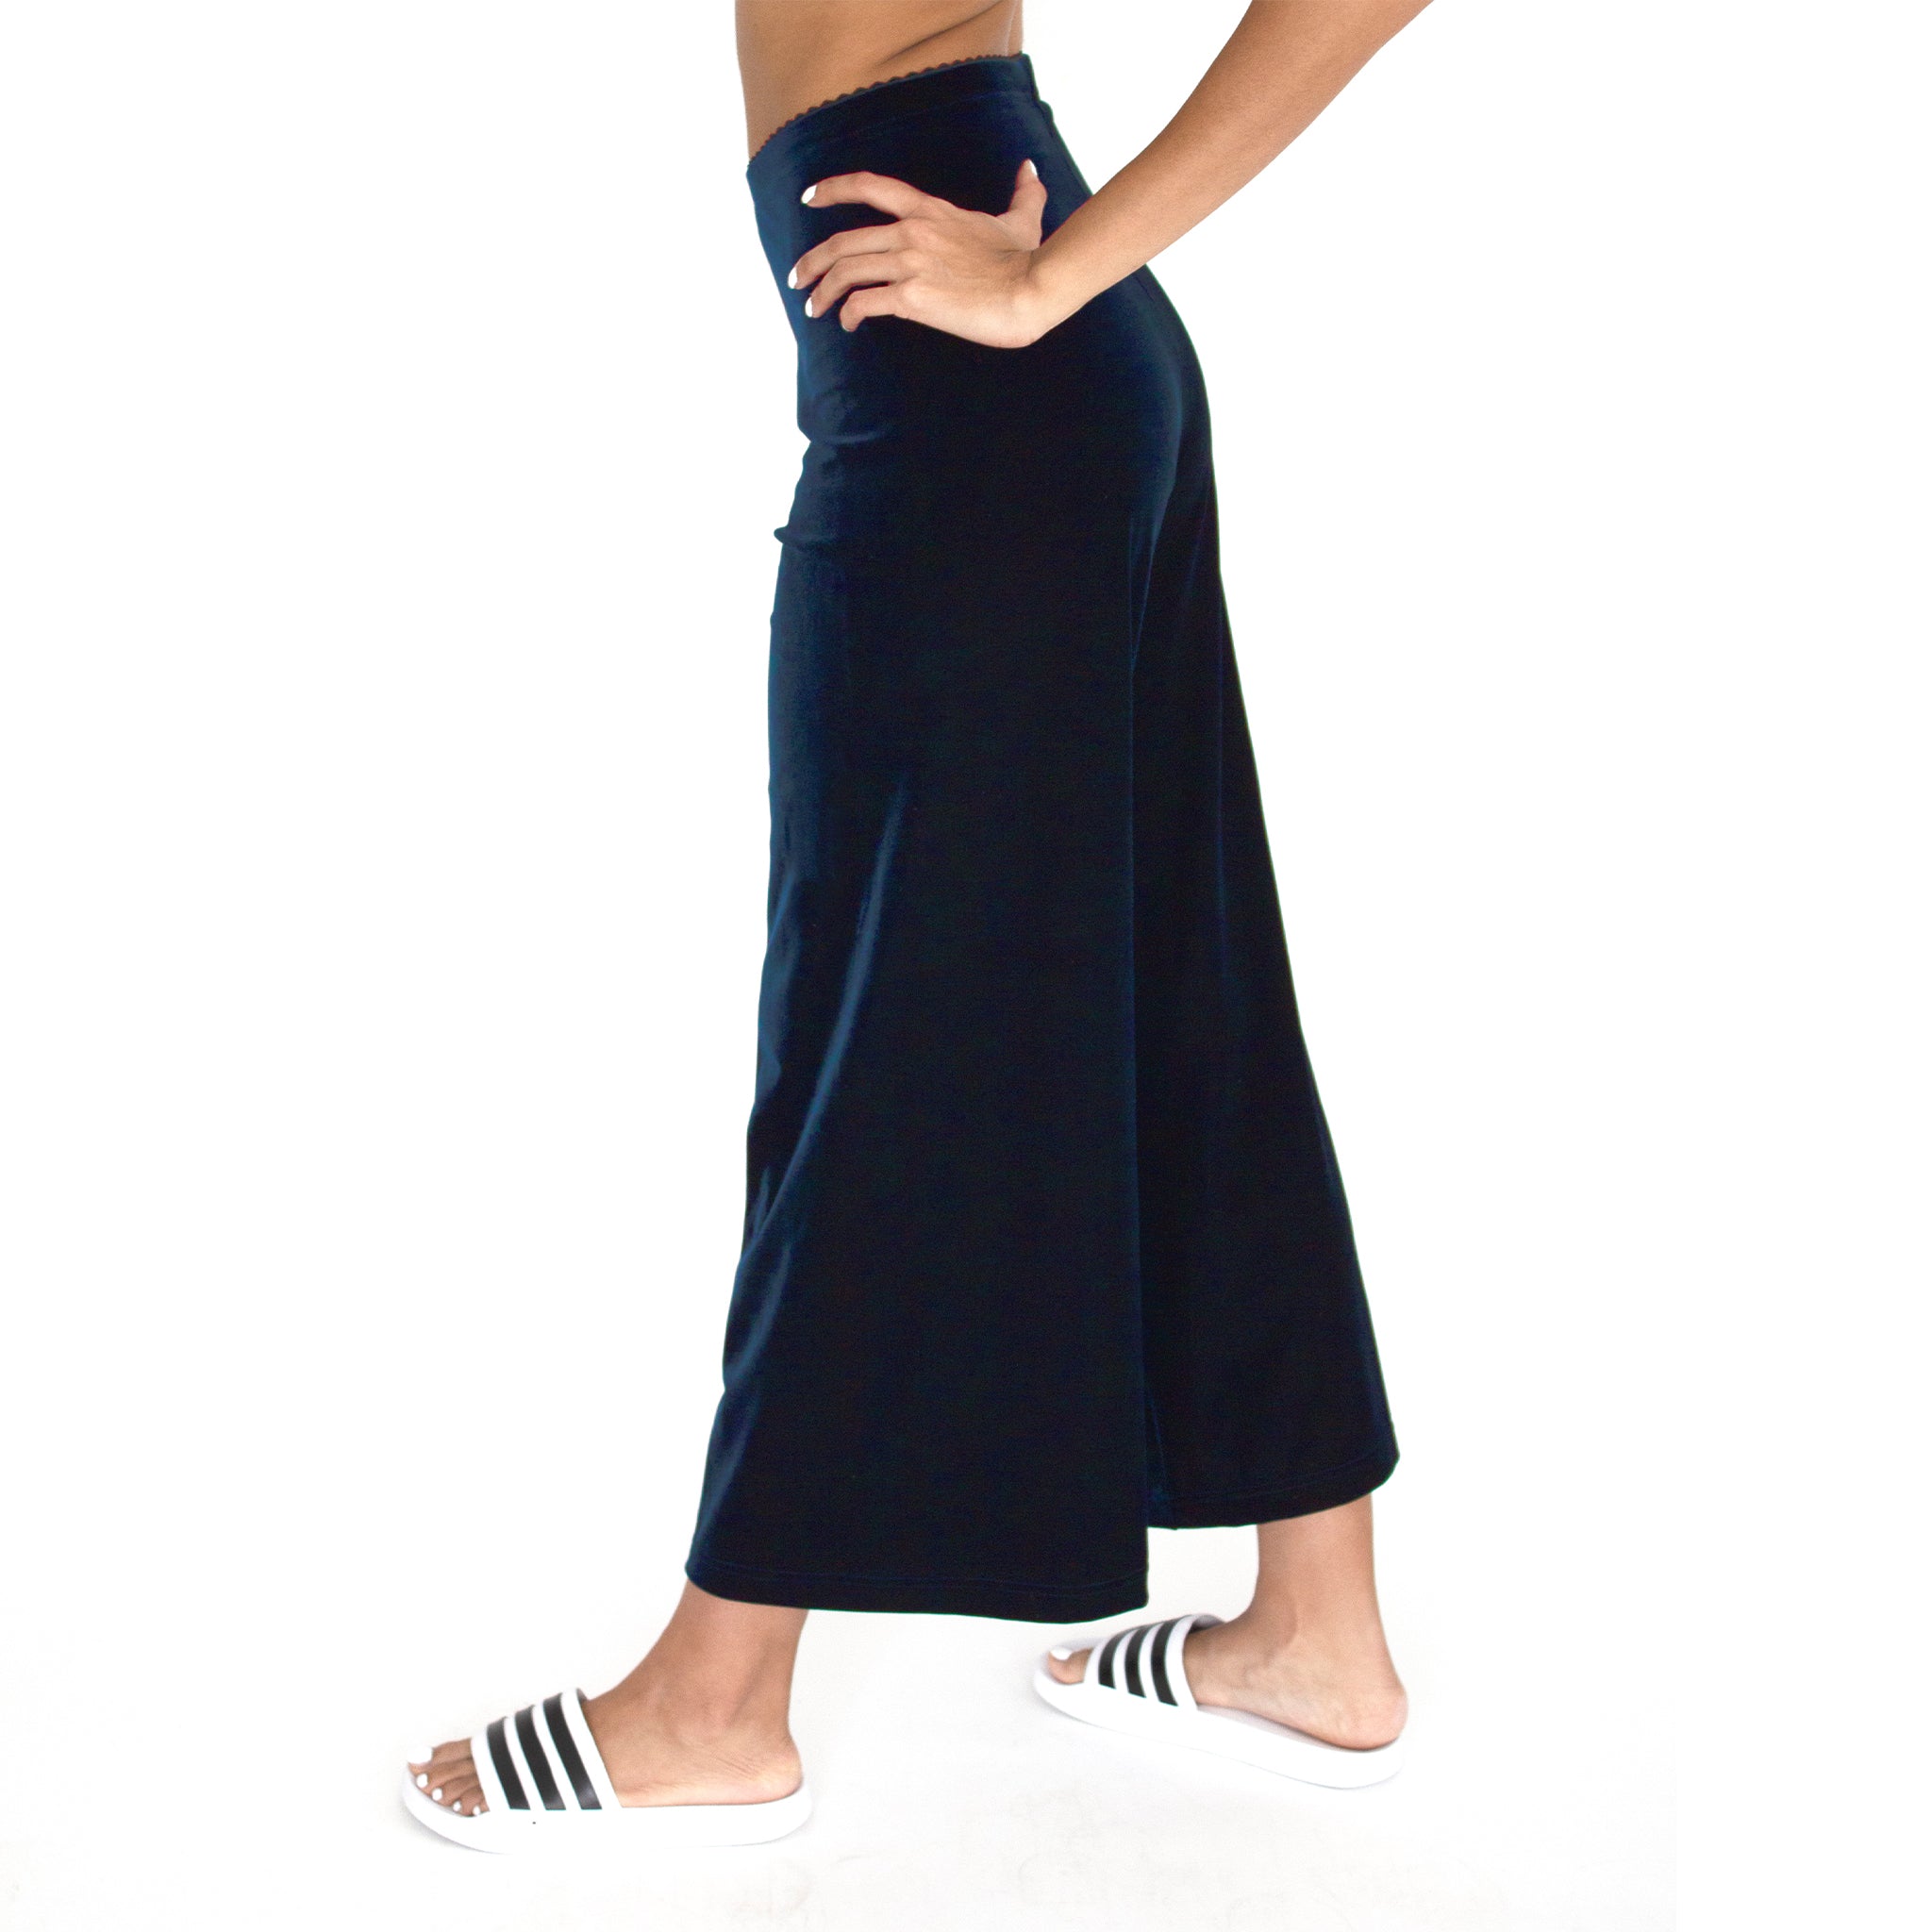 Side view of our Cropped Length Stretch Velvet Pant in Sapphire (Dark Blue) has elastic waist and 26" inseam.